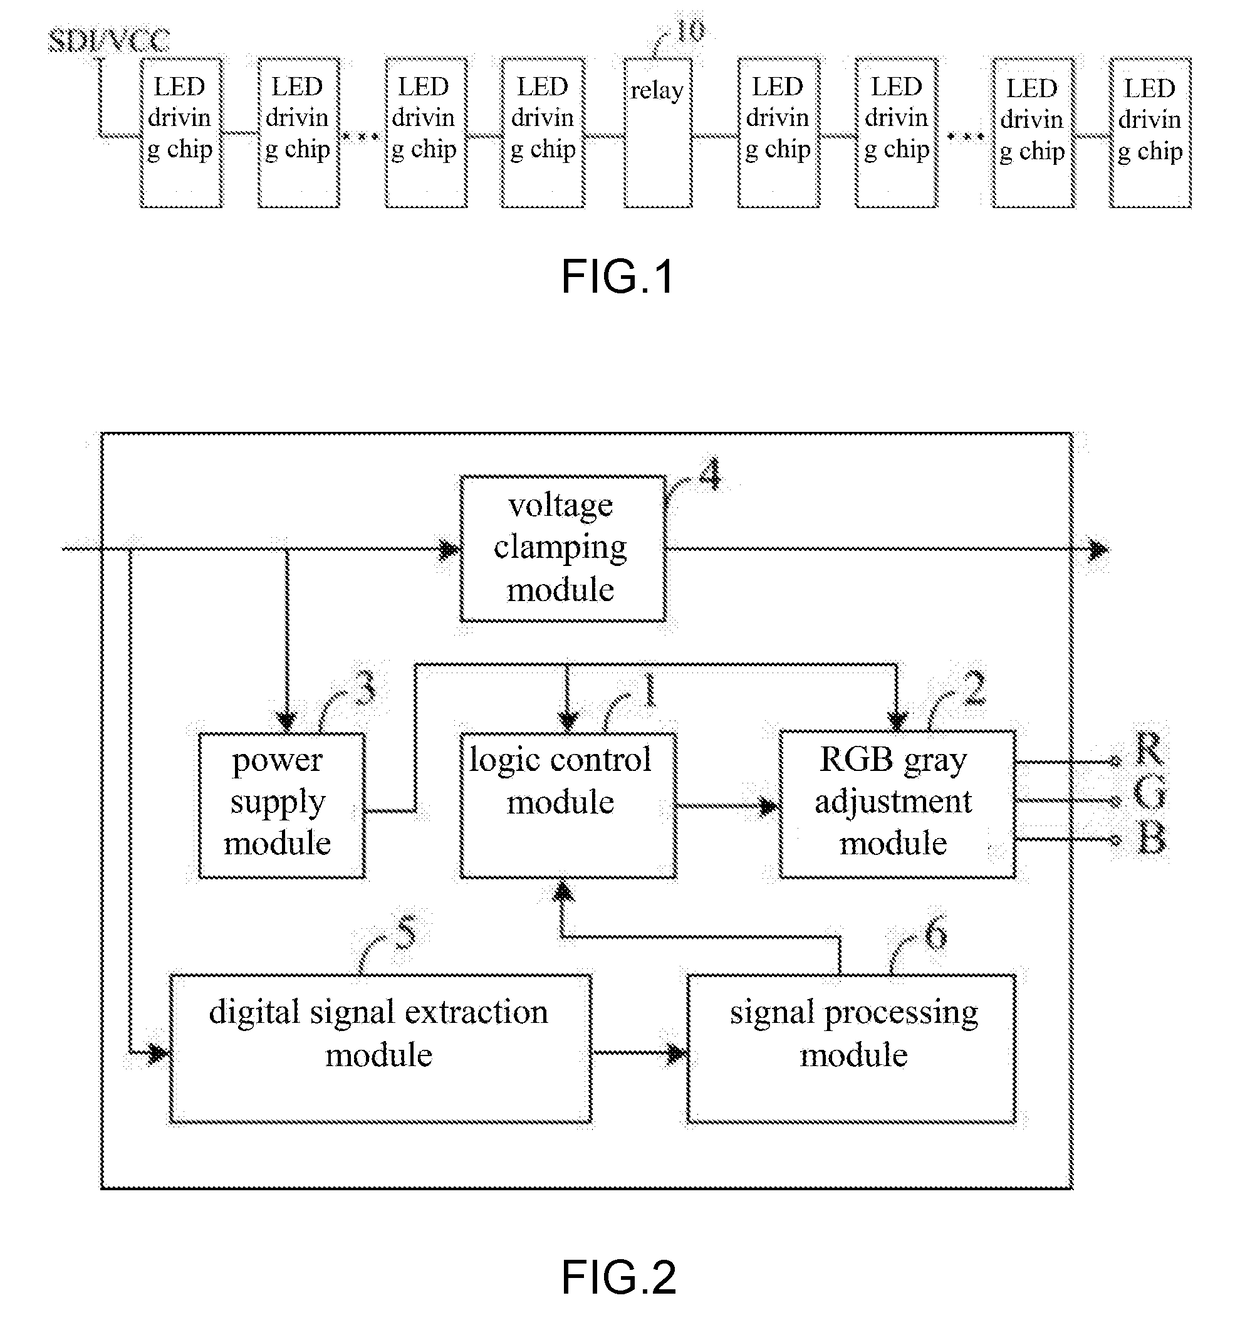 LED Driving System with Power Transmission Path Coincided with Data Transmission Path